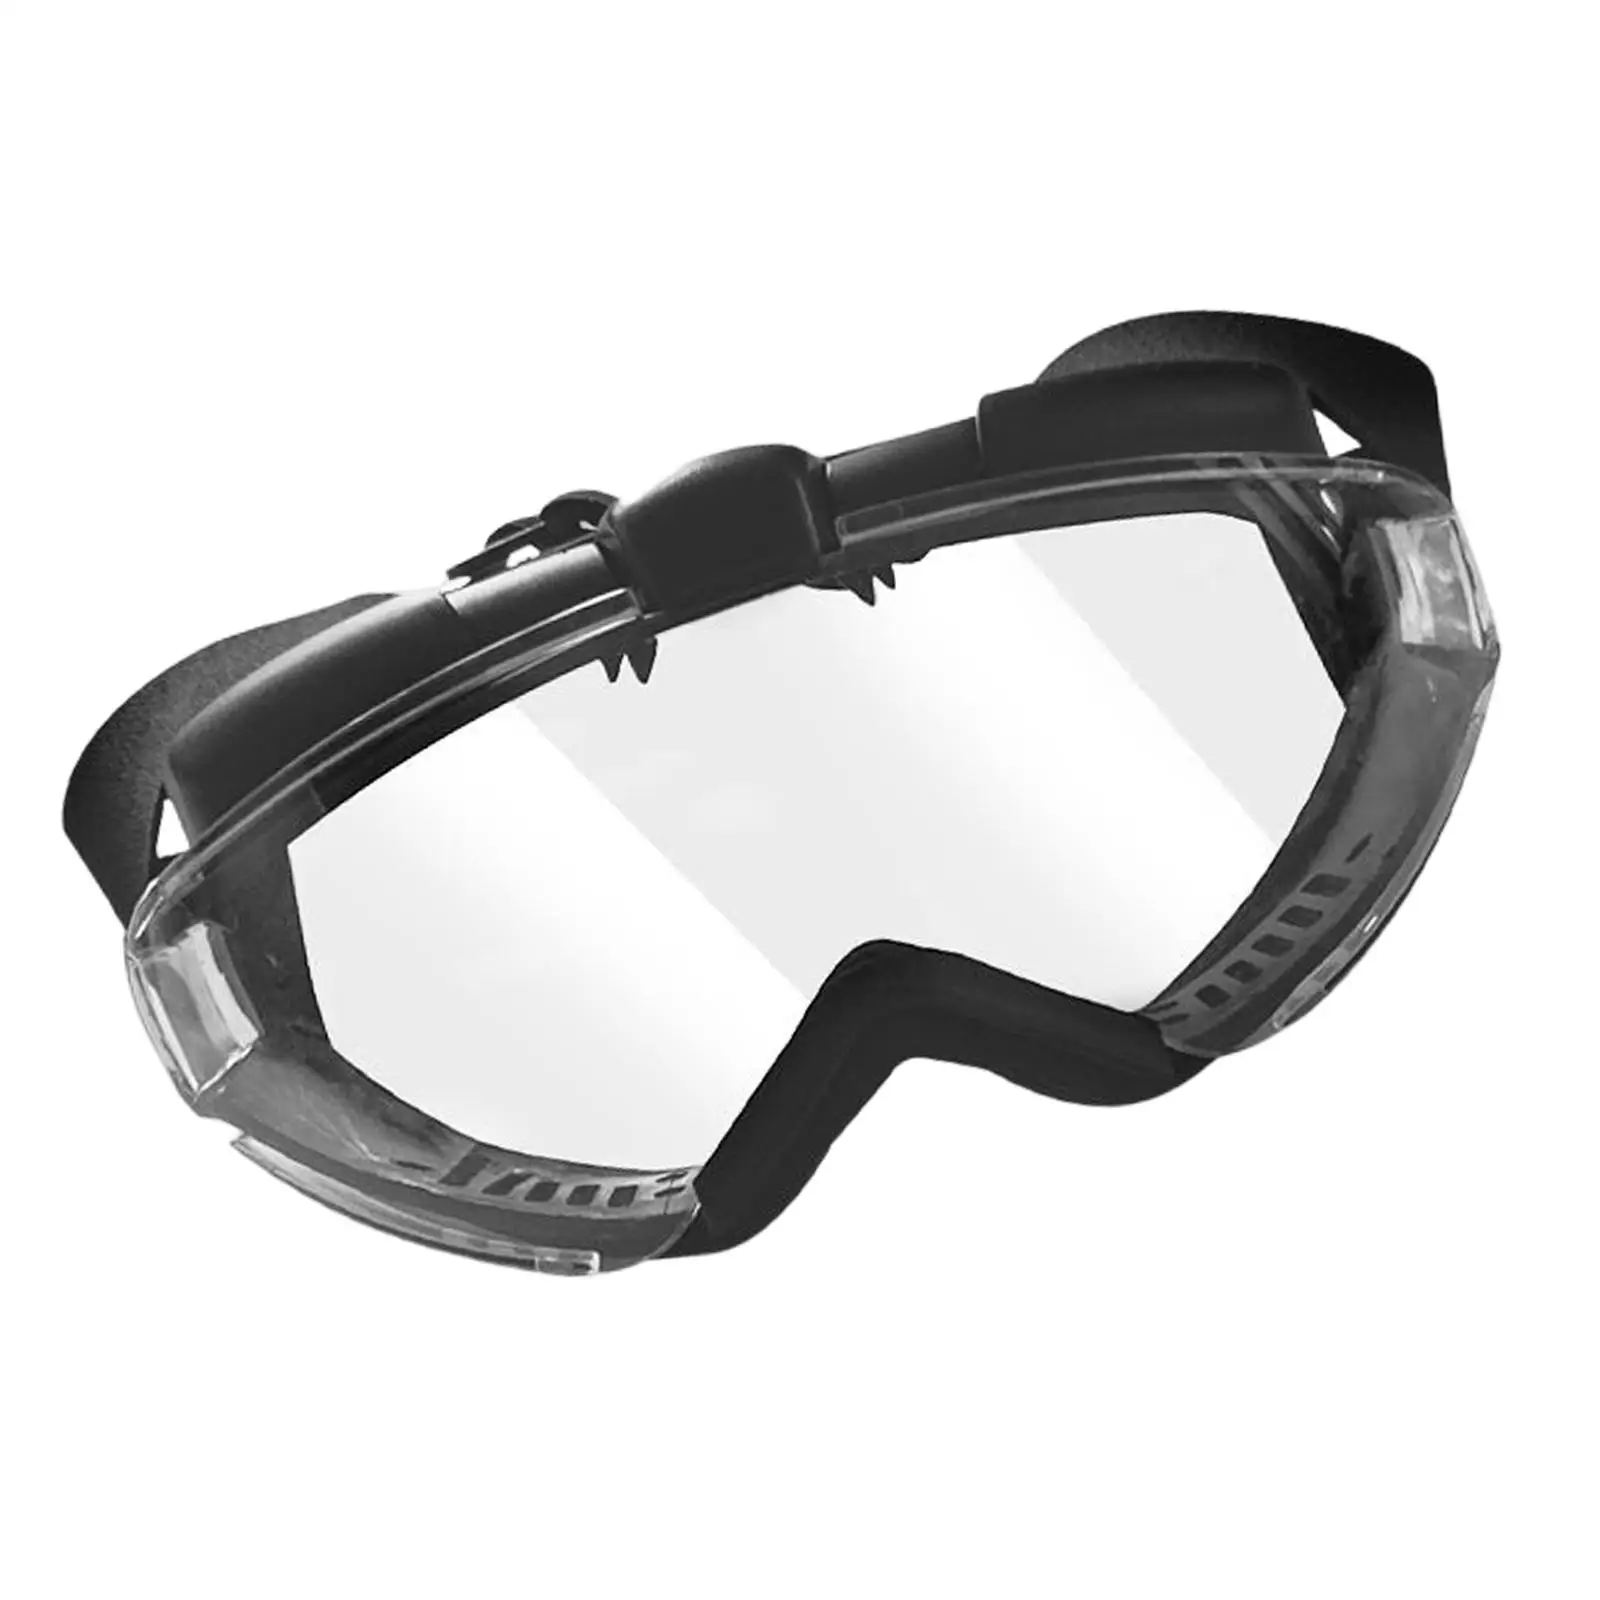 Outdoor Glasses Goggles Unisex Protection Dustproof for Riding Cycling Hiking Fishing